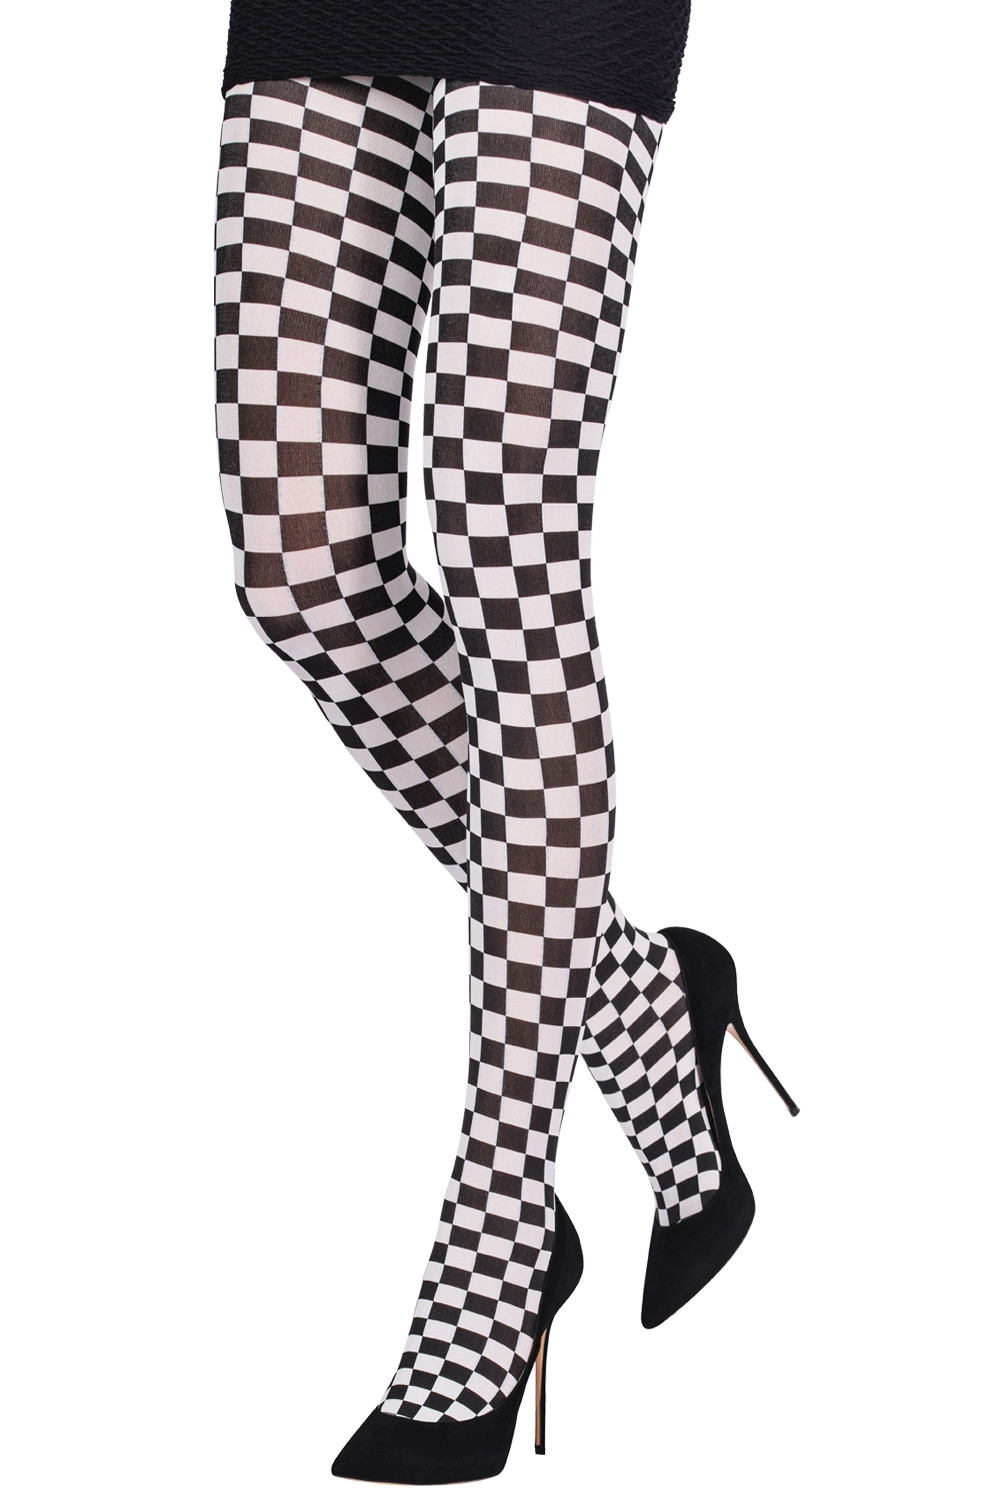 Two Toned Chess Tights, Timeless Styles, Women